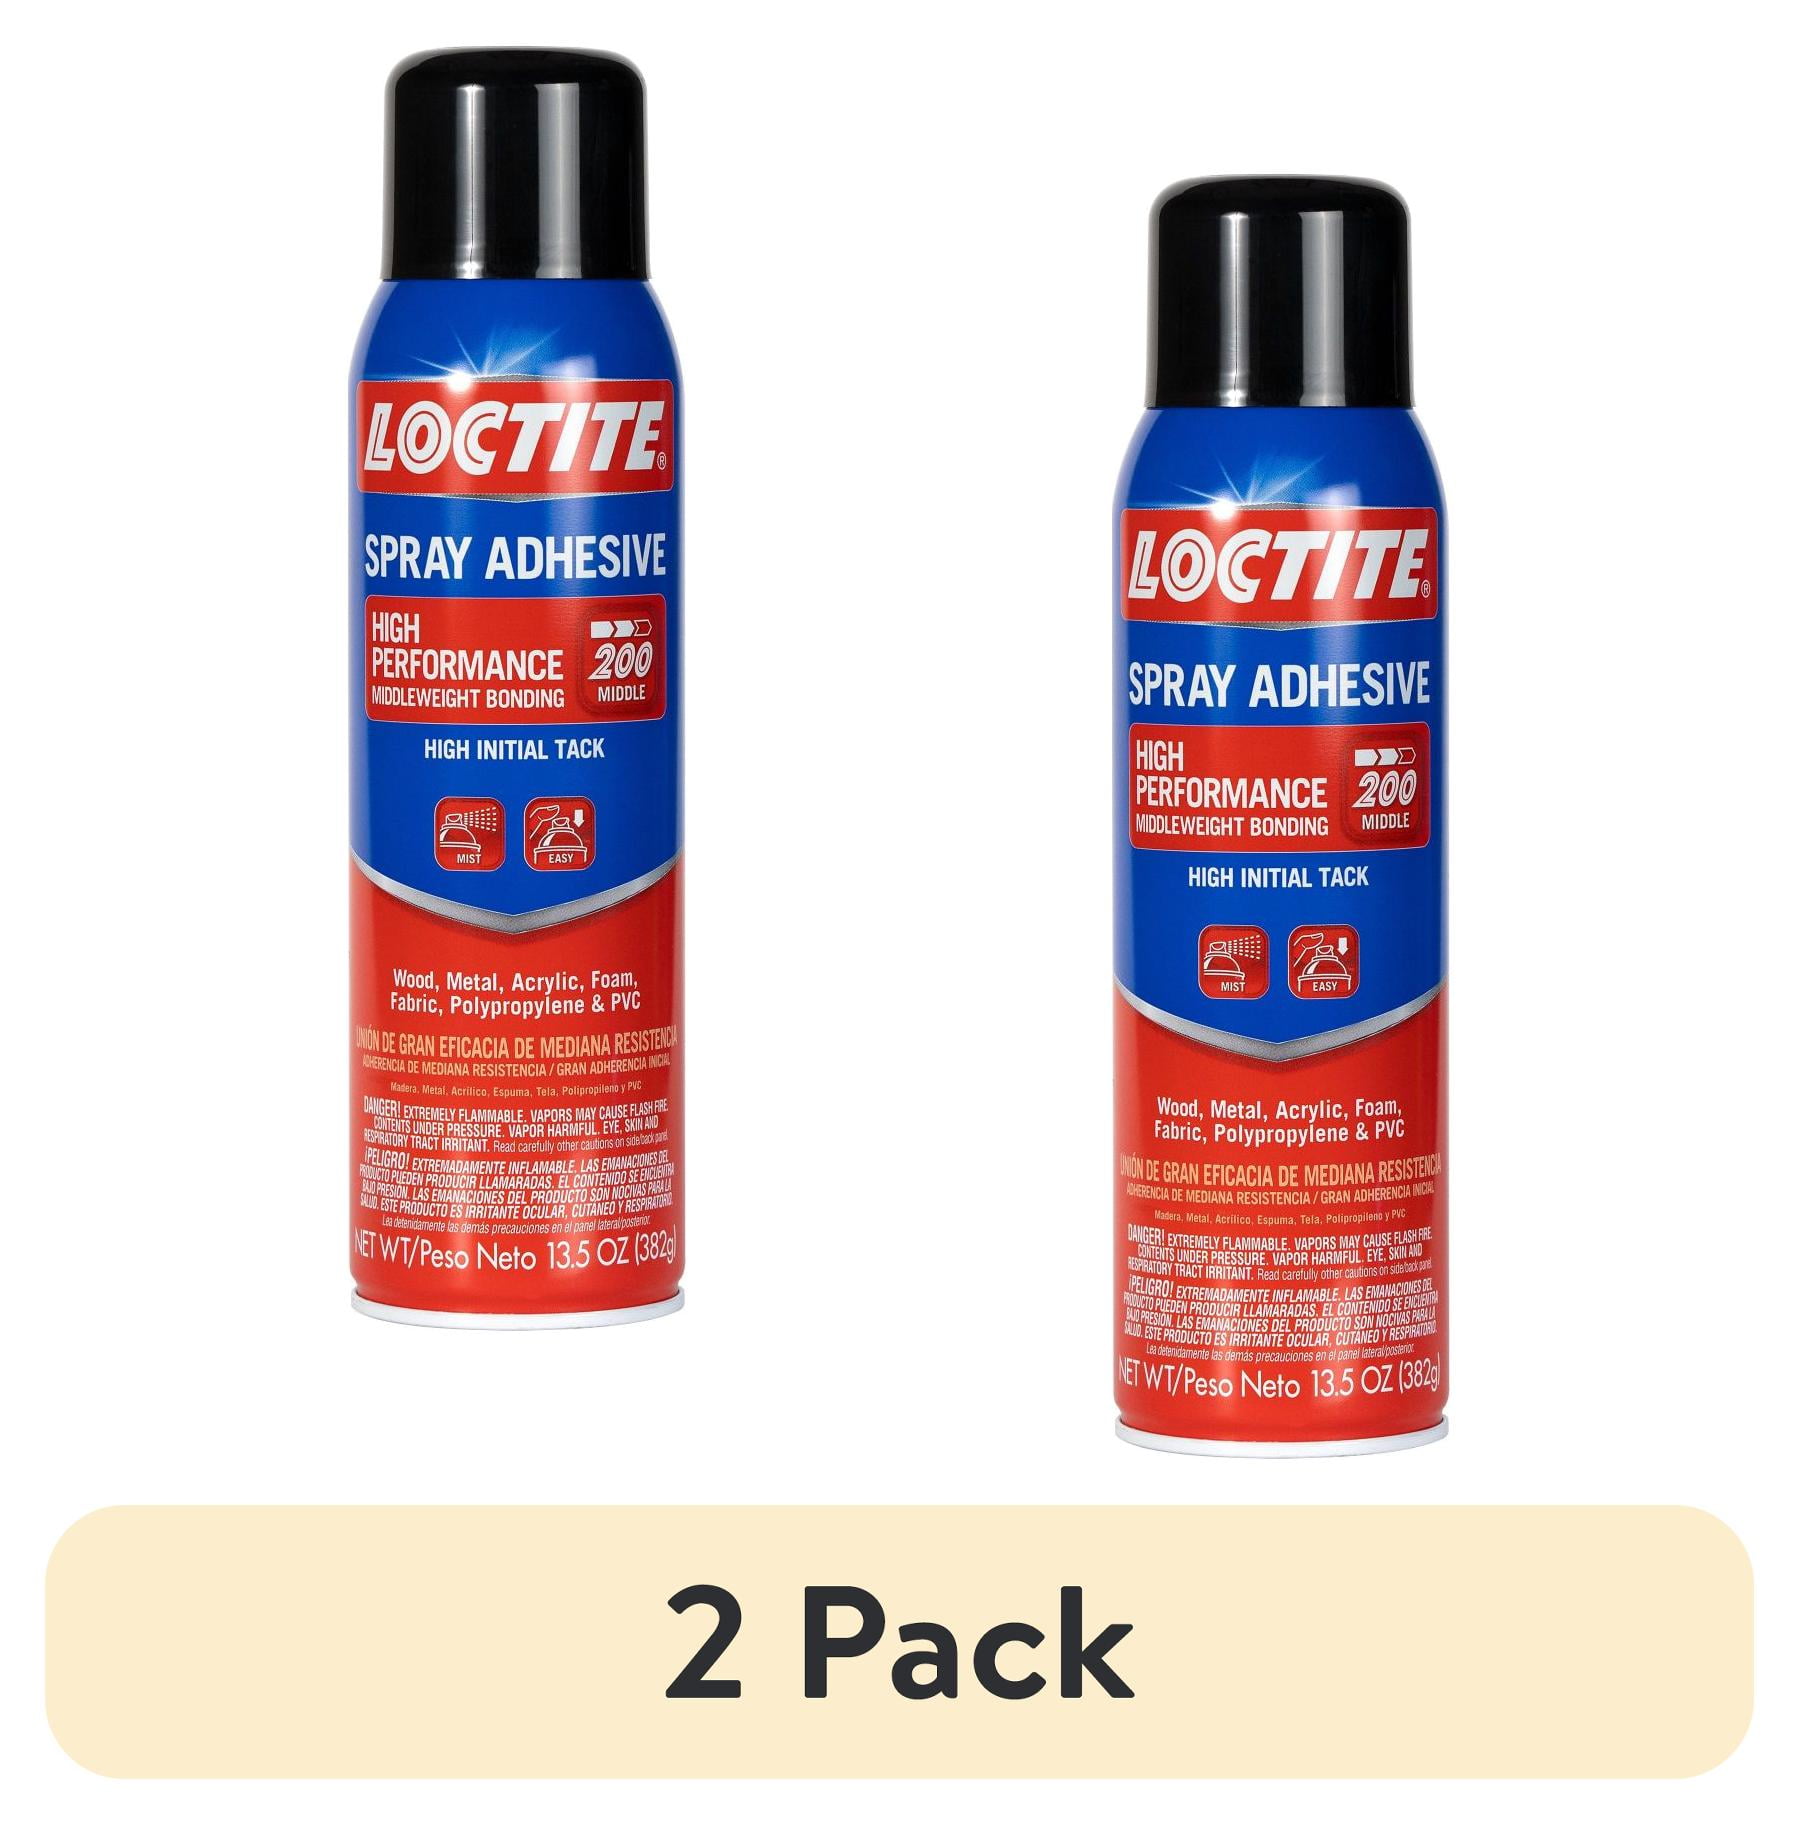 2 pack) Loctite High Performance Spray Adhesive, Pack of 1, Clear